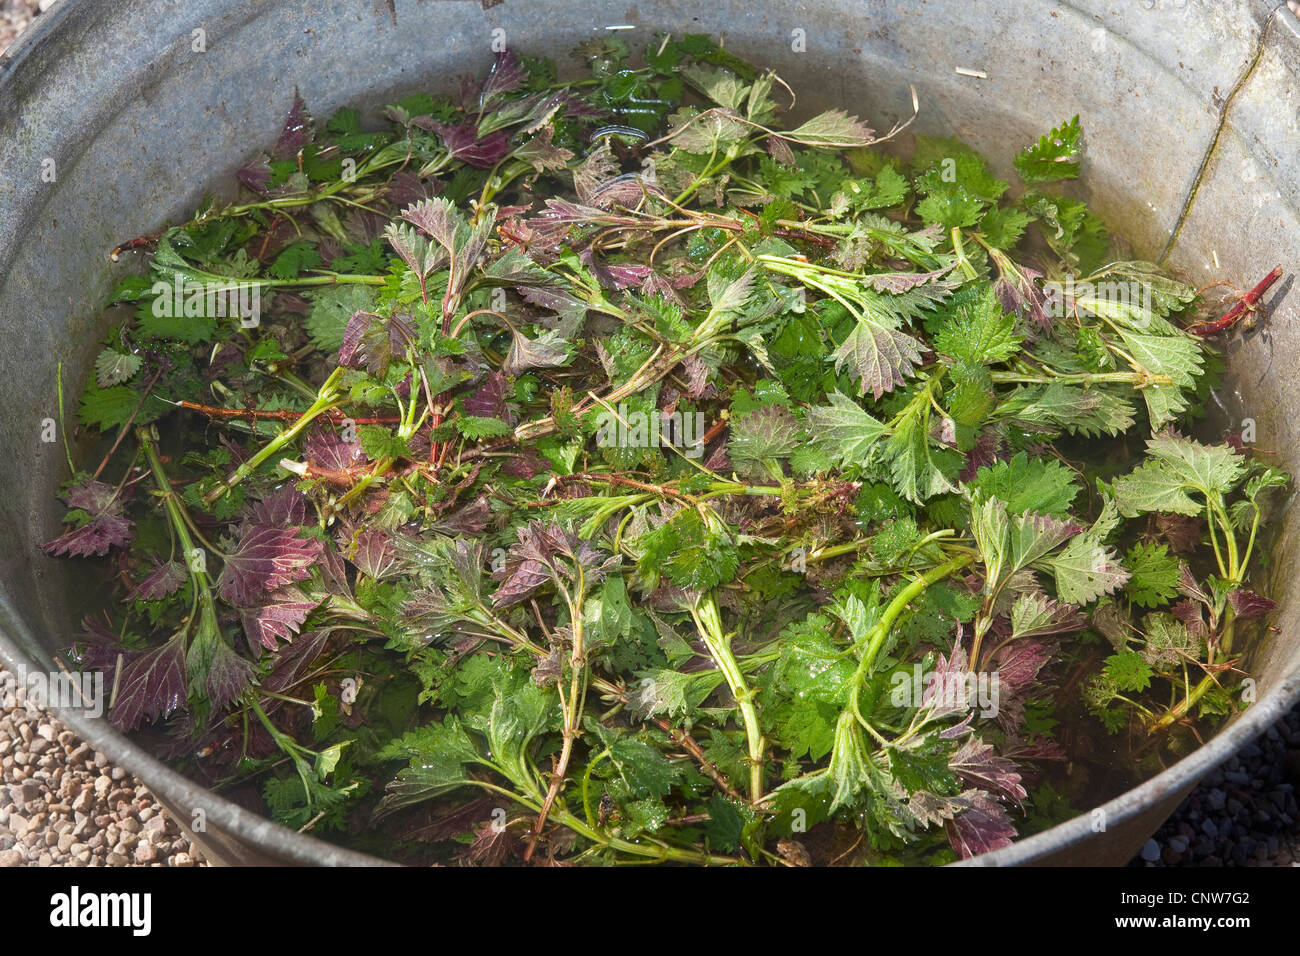 stinging nettle (Urtica dioica), producing of nettle slurry from fresh nettles for ecological pest control and fertilizer, Germany Stock Photo